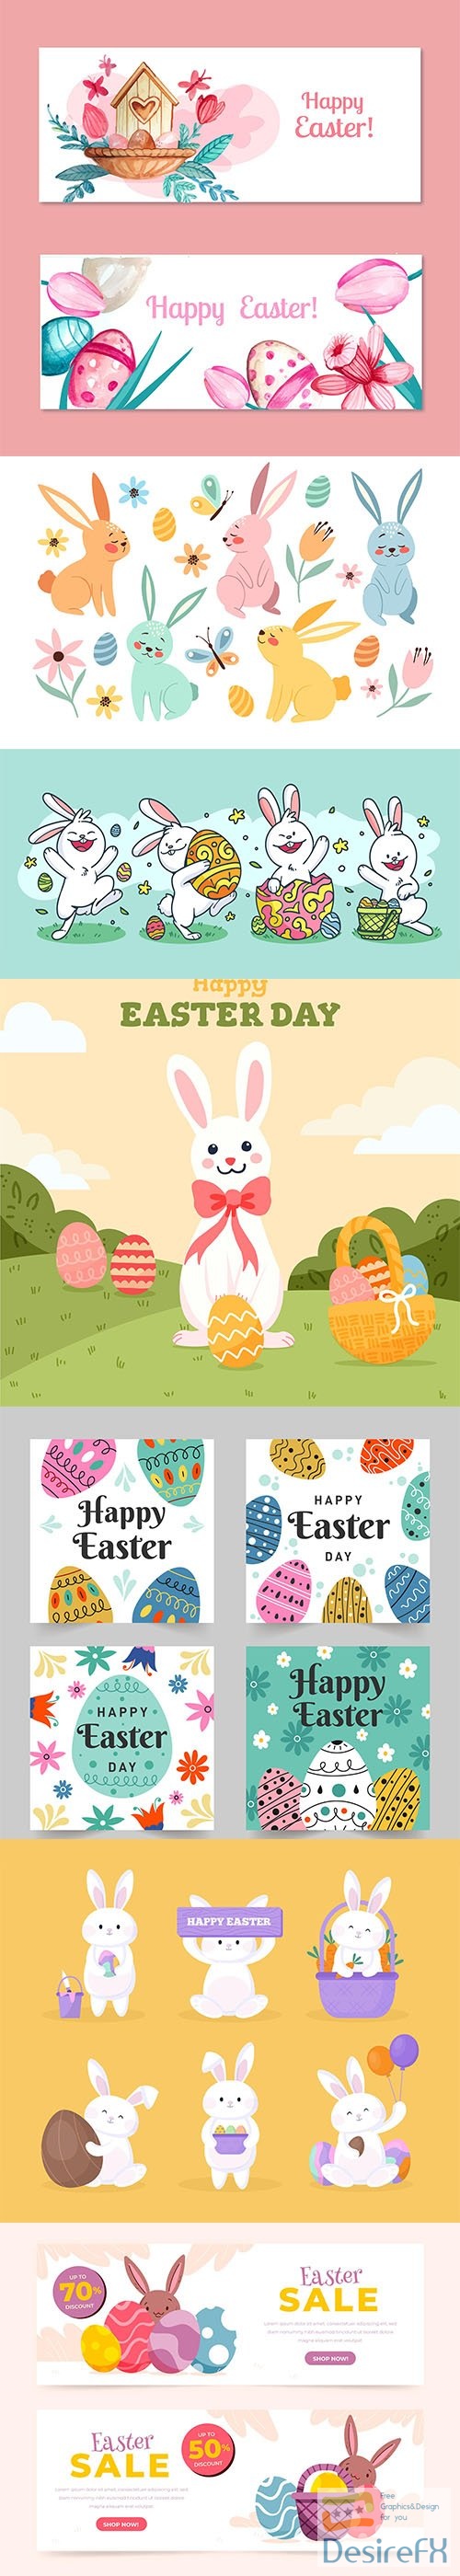 Hand-drawn cute easter illustrations and banner vol 3